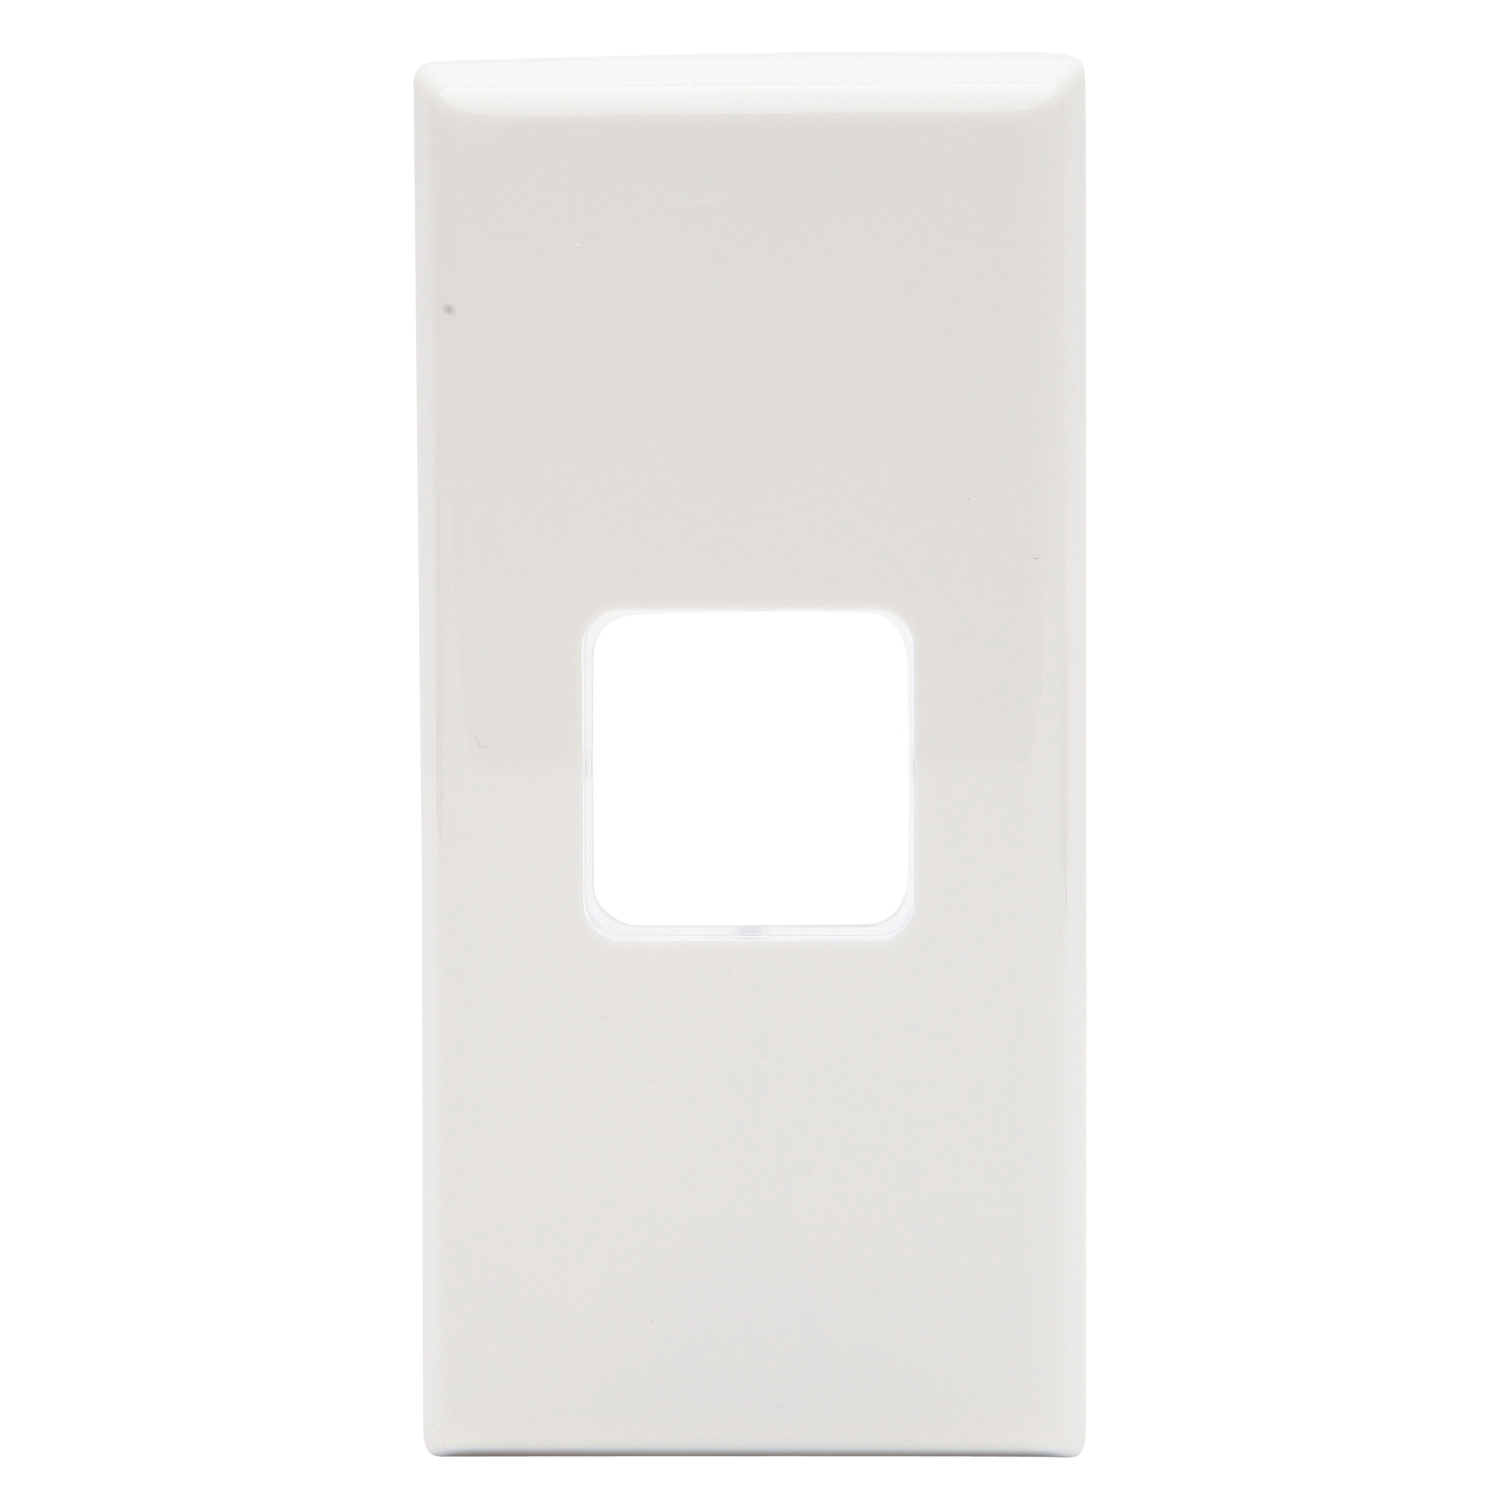 PDL 600 Series - Grid + Cover Plate Worktop Switch 1-Gang - White